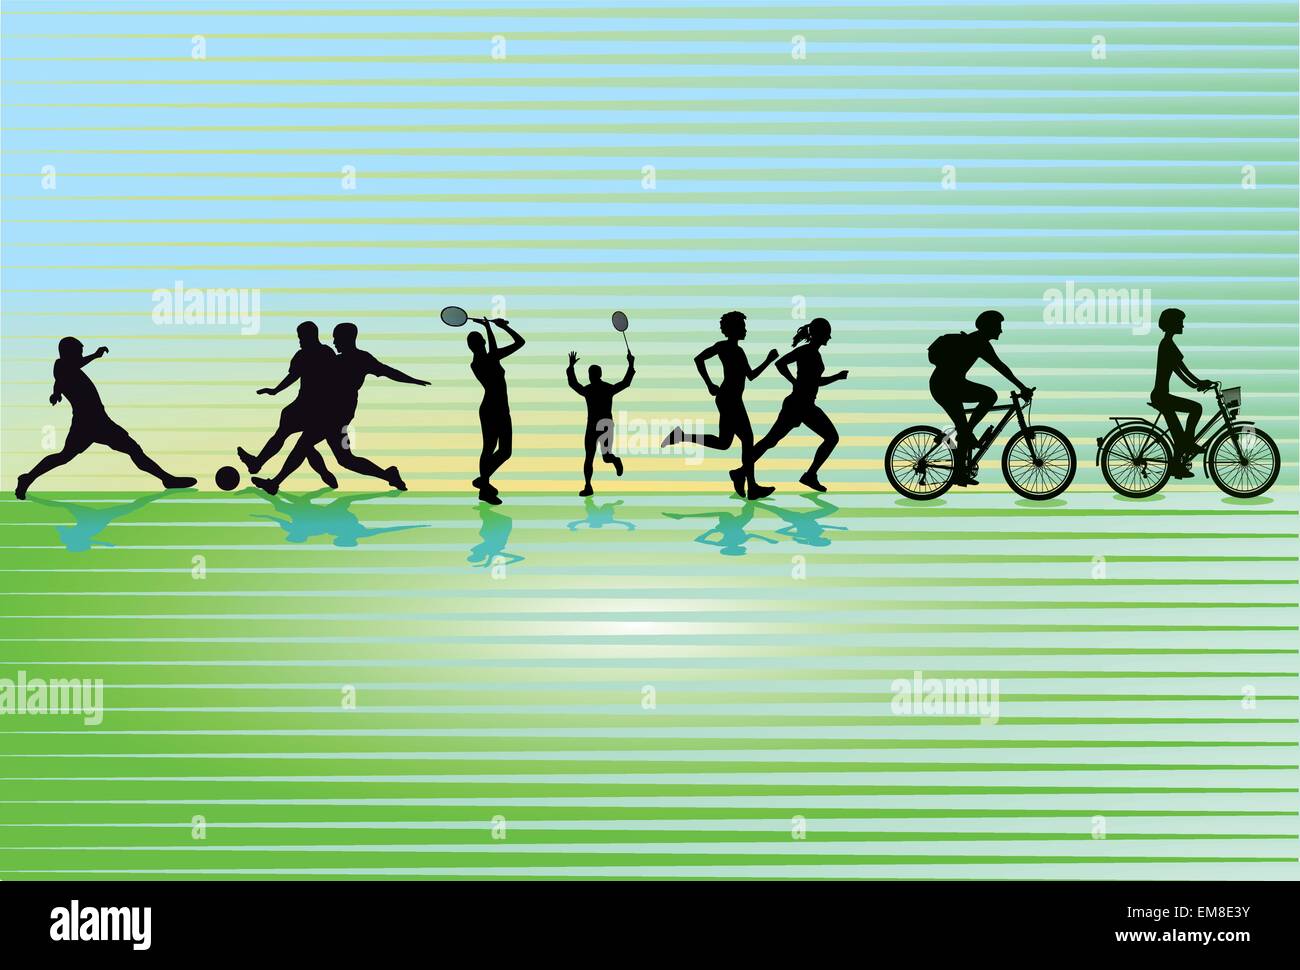 Sporting Leisure Activity Stock Vector